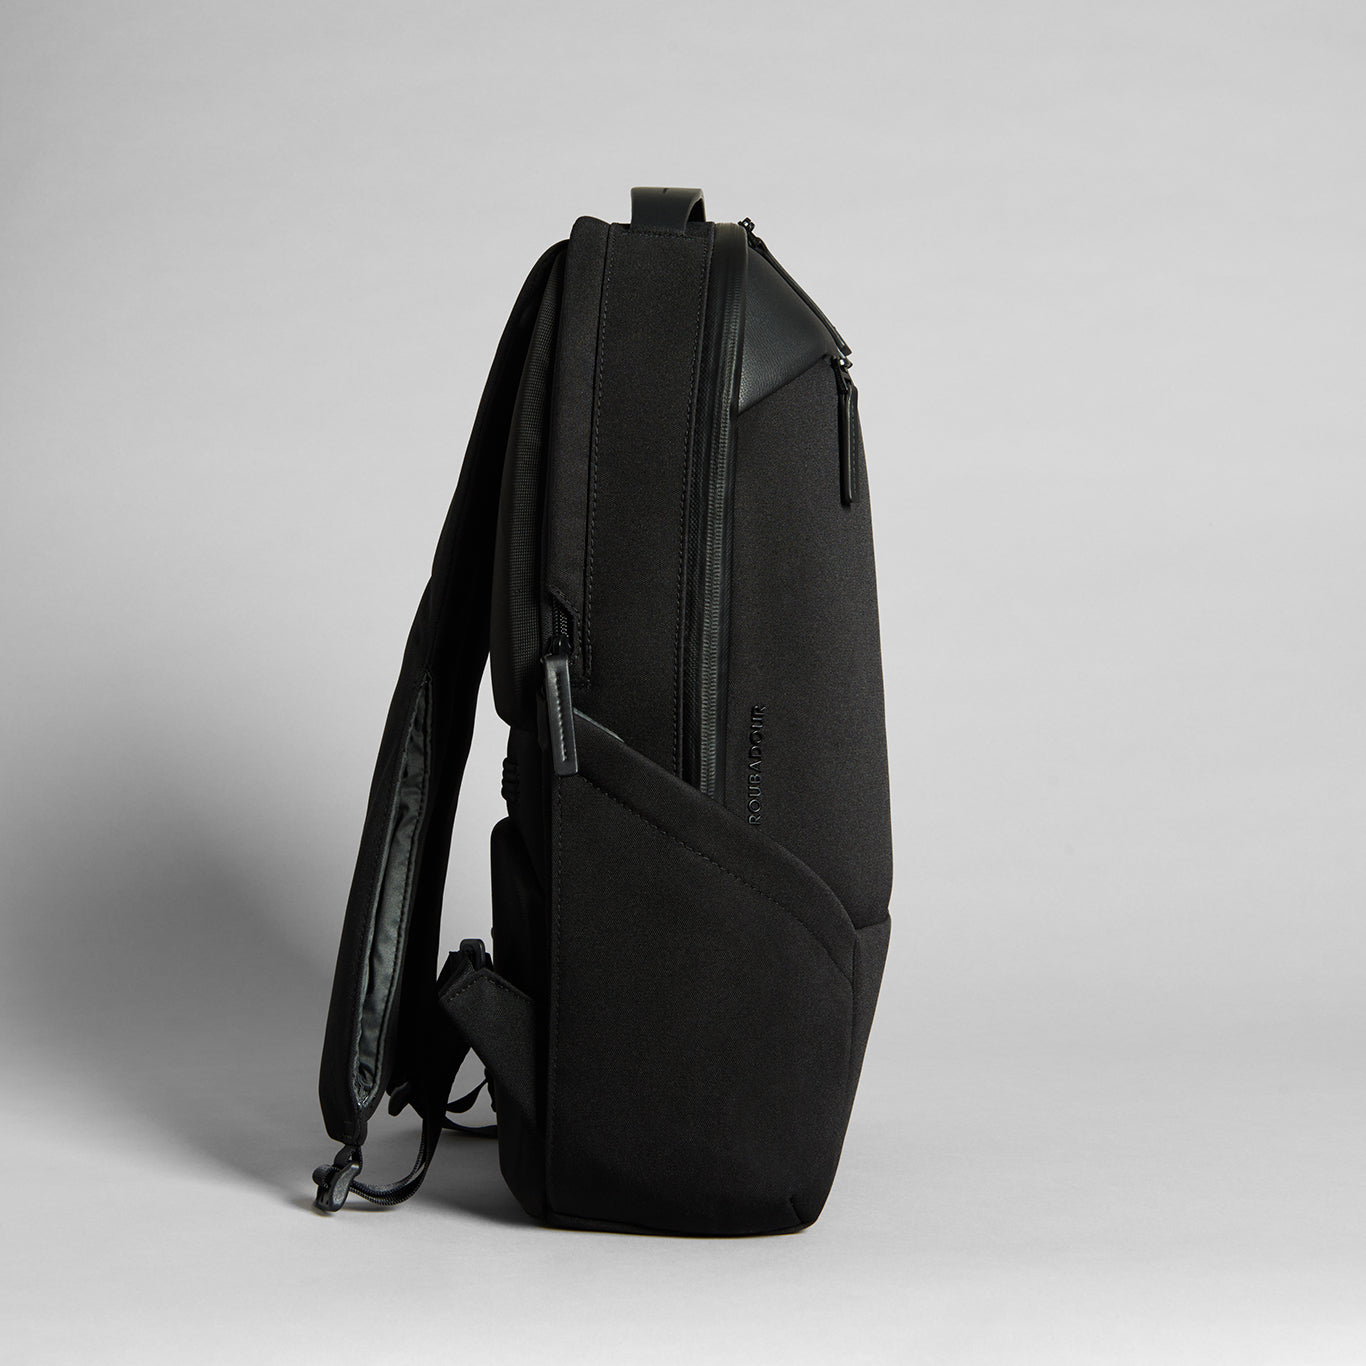 Backpack - Custom made Backpack  Made By Alex New York Made in USA